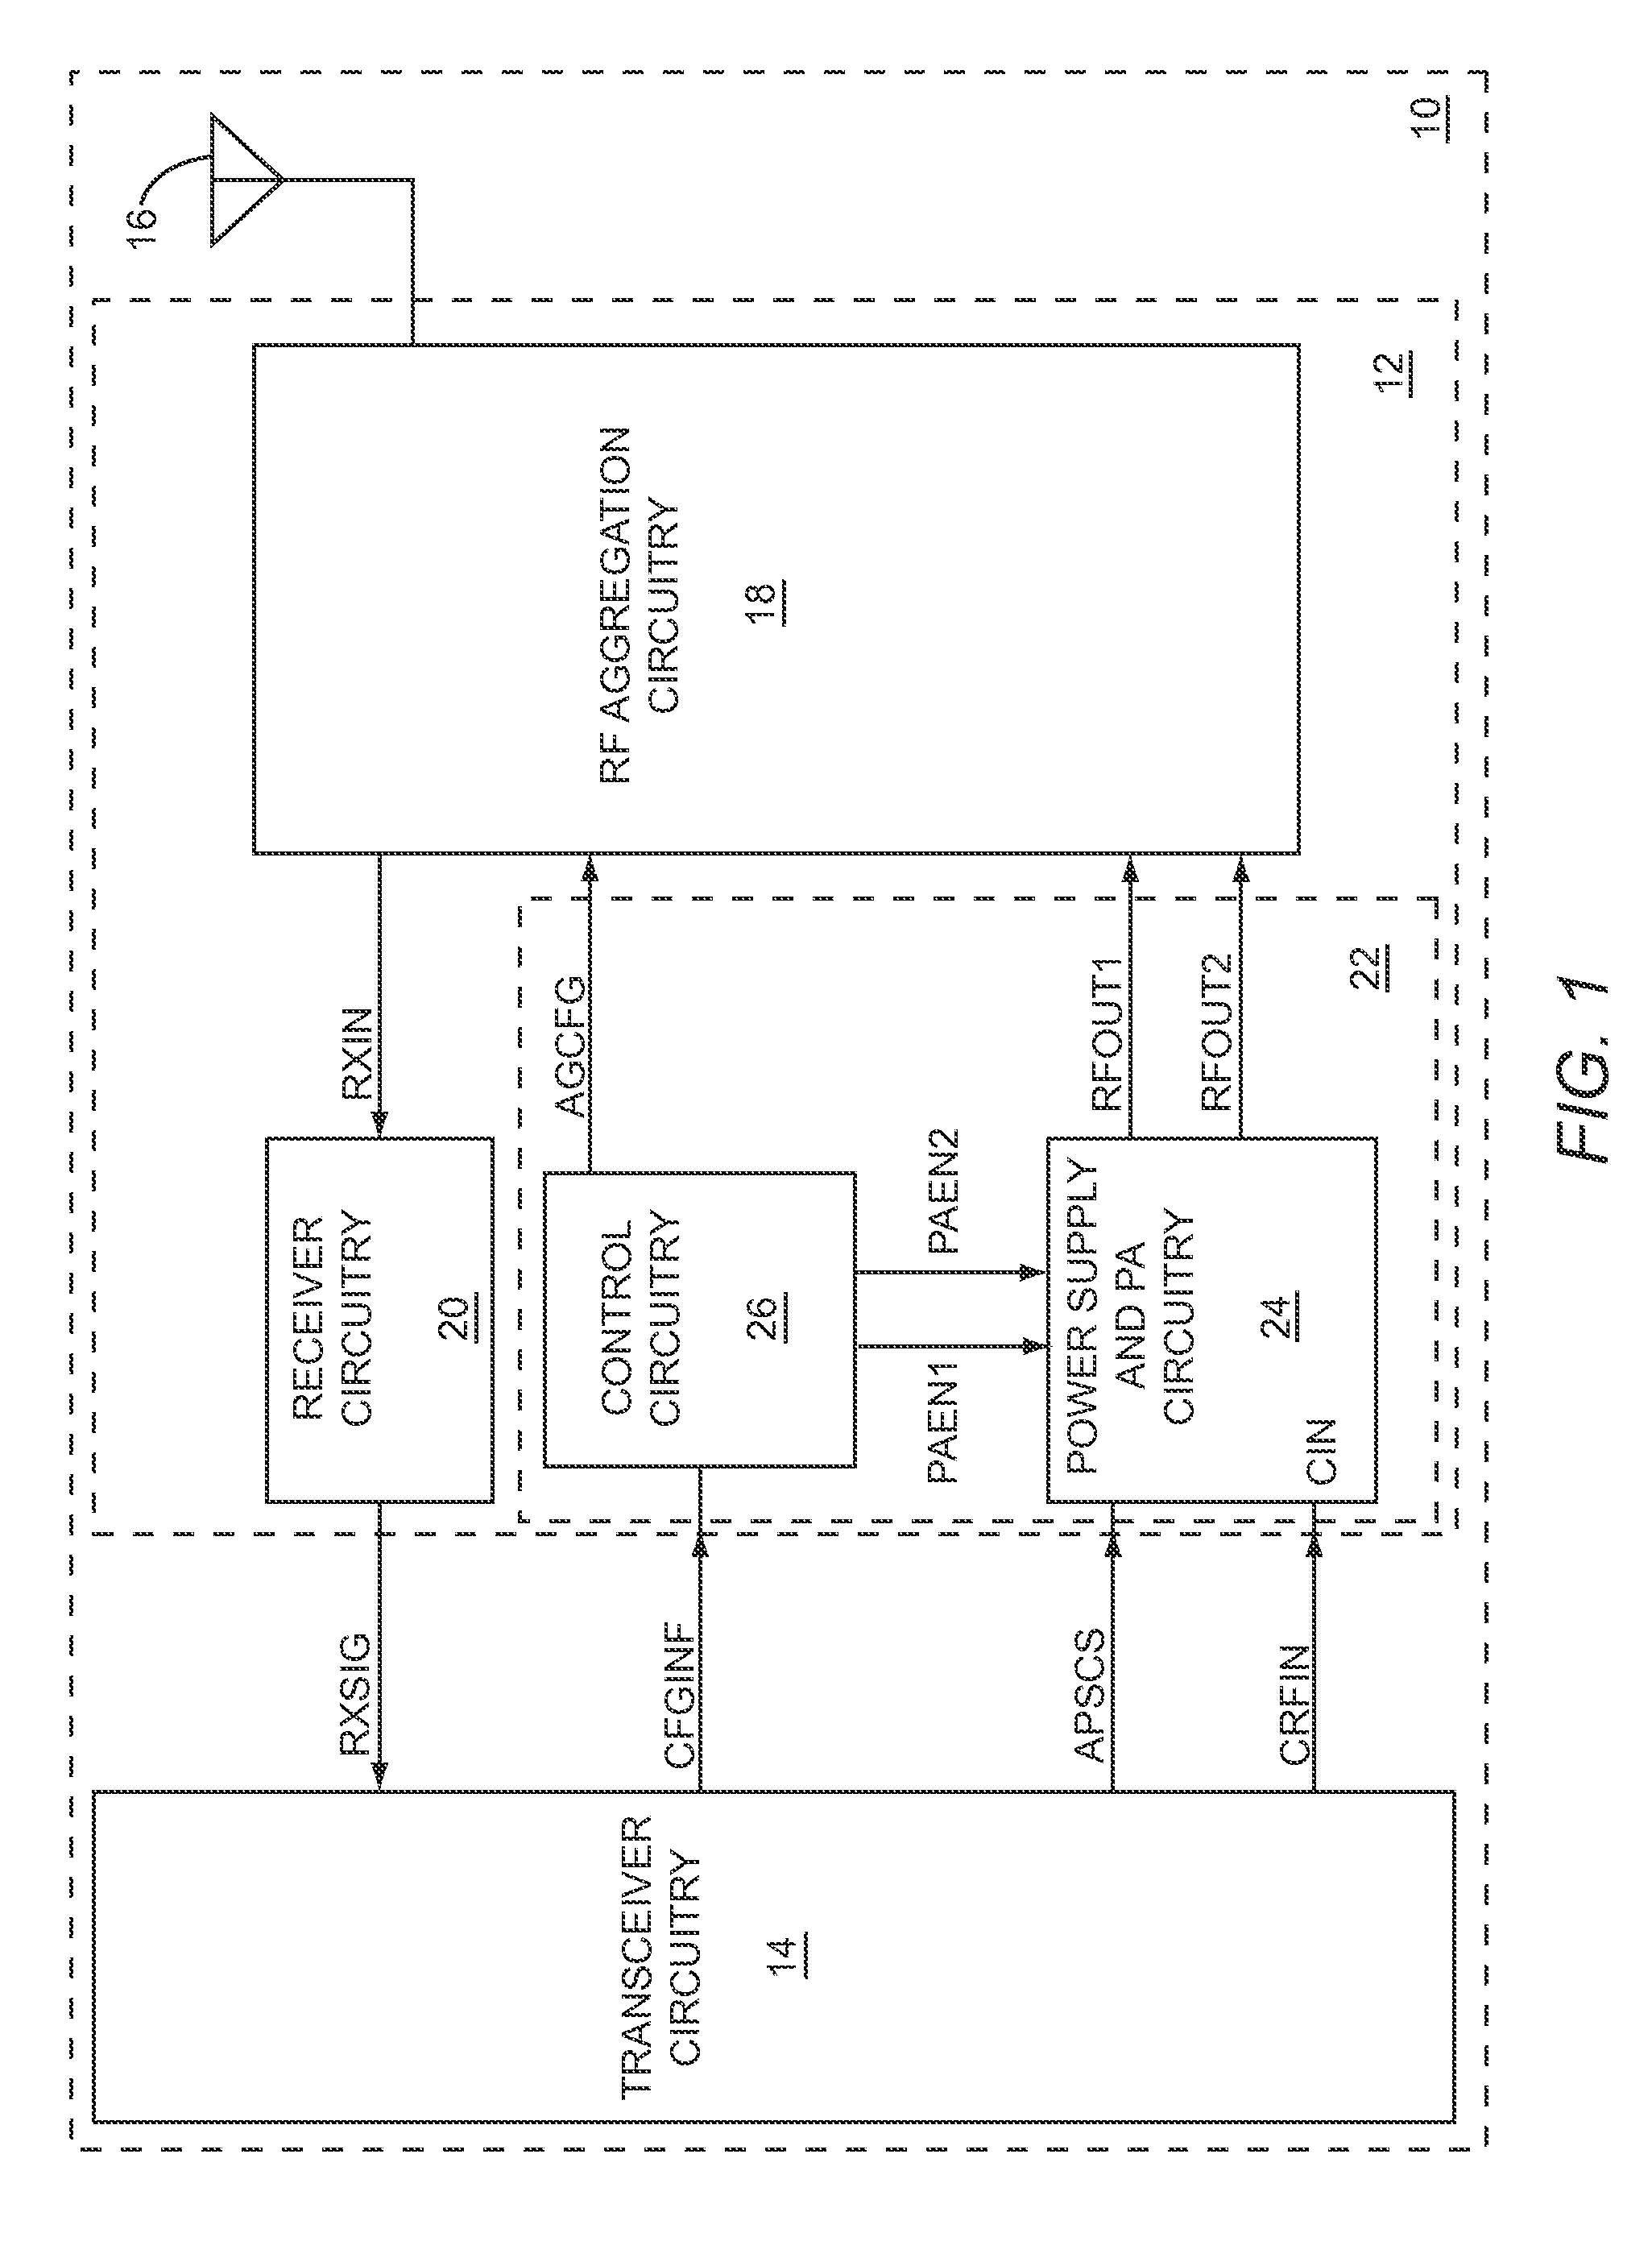 Dual path multi-mode power amplifier routing architecture